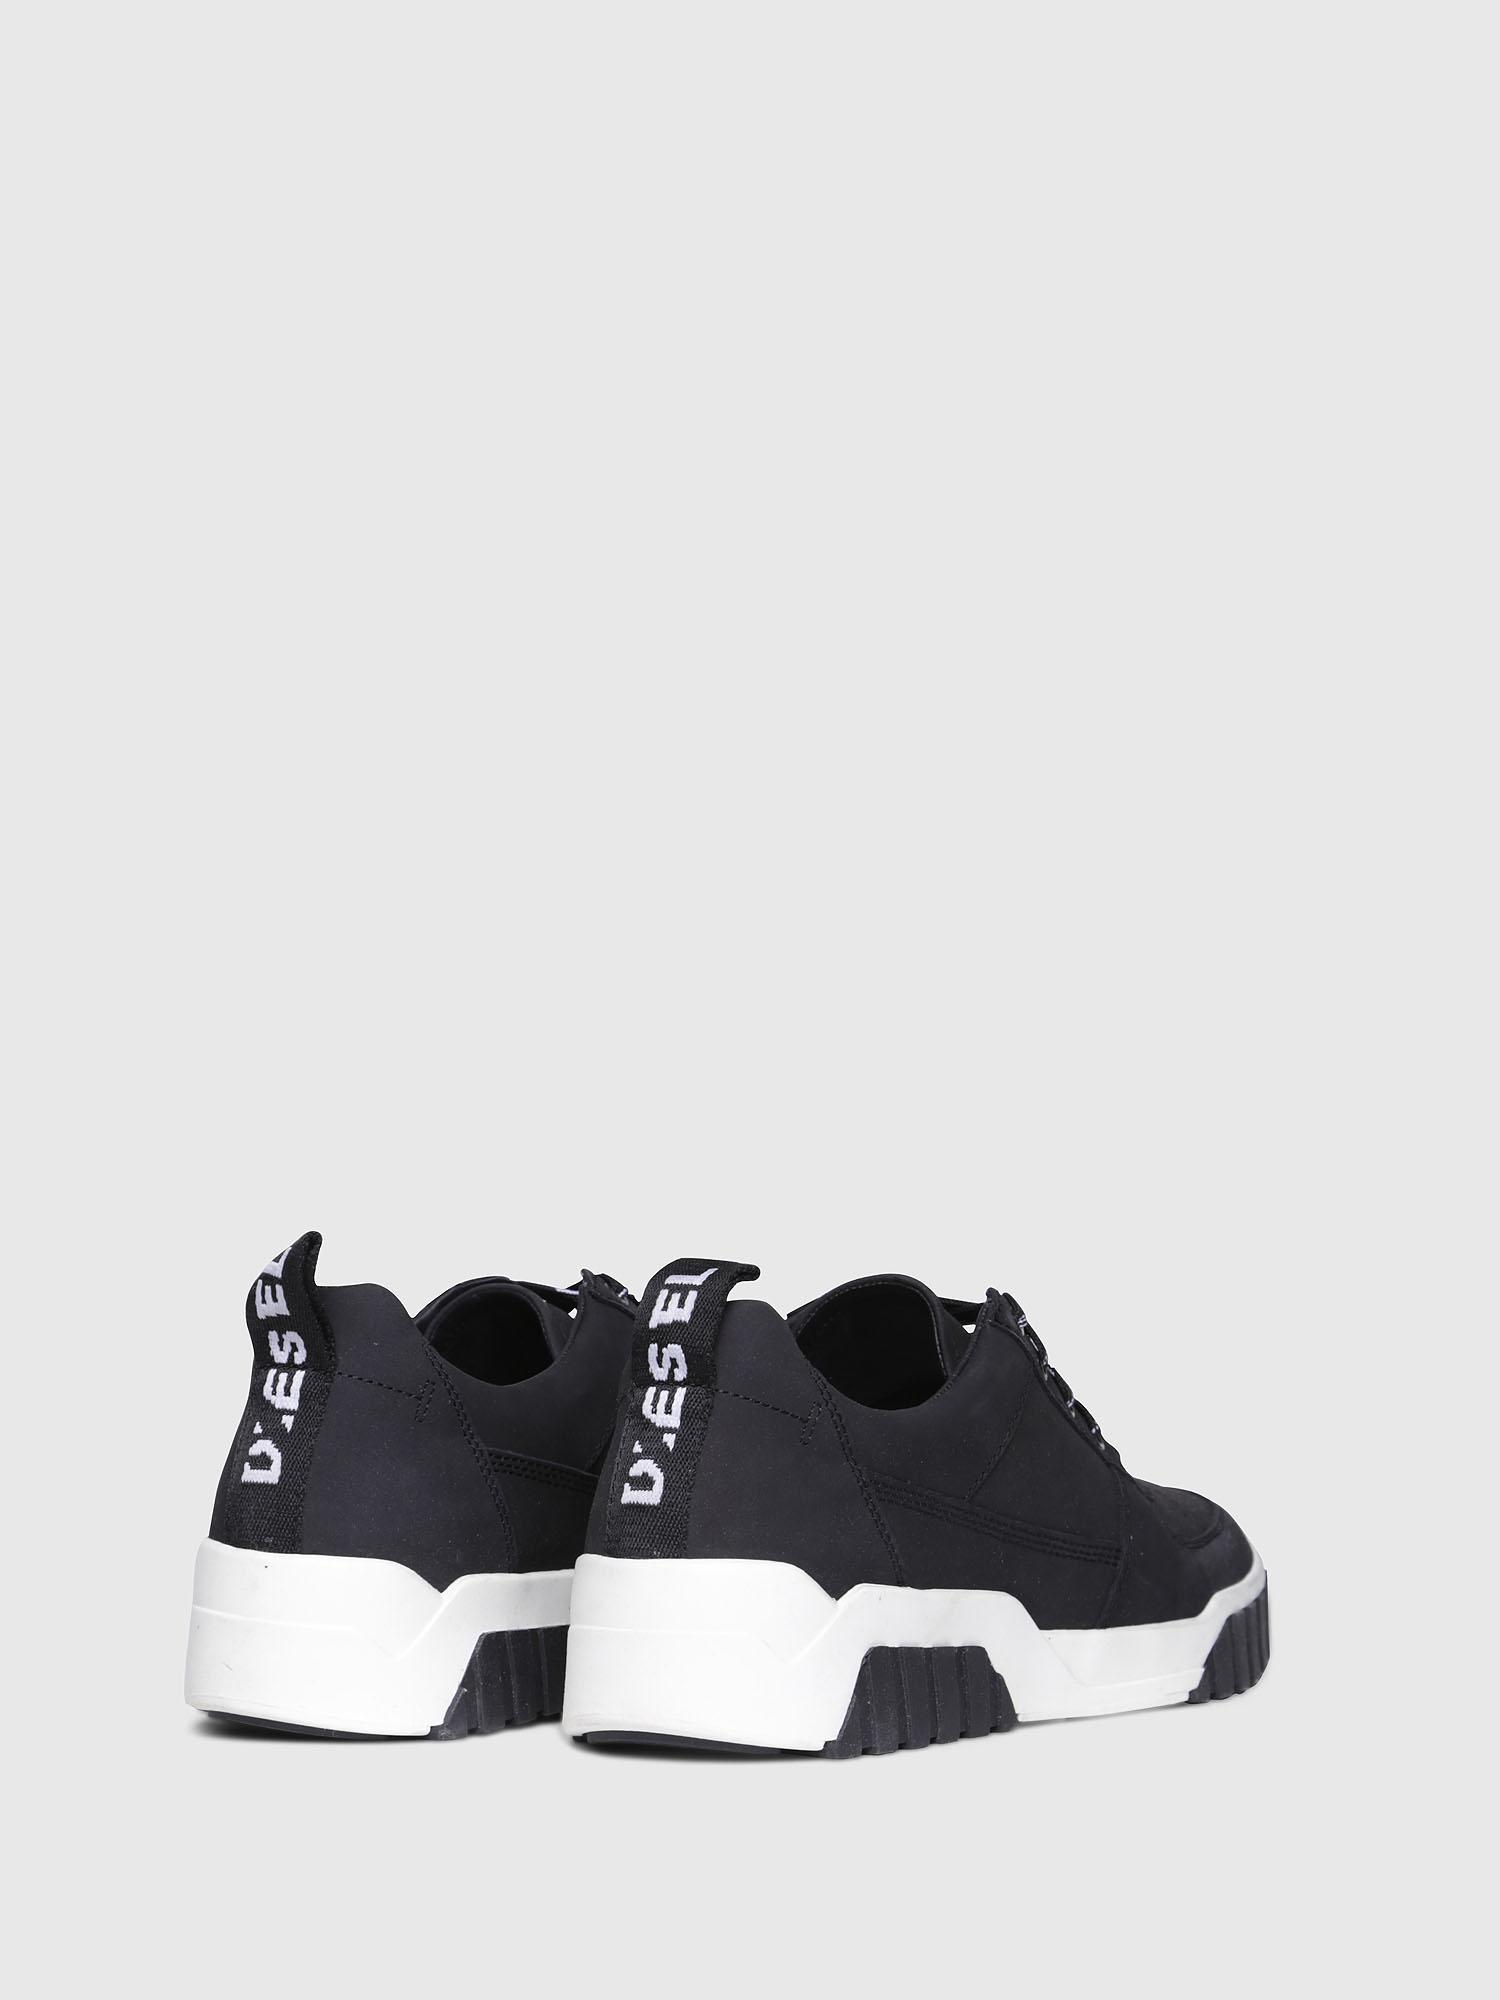 DIESEL S-rua Lc Sneakers In Suede With Two-tone Sole in Black for Men ...